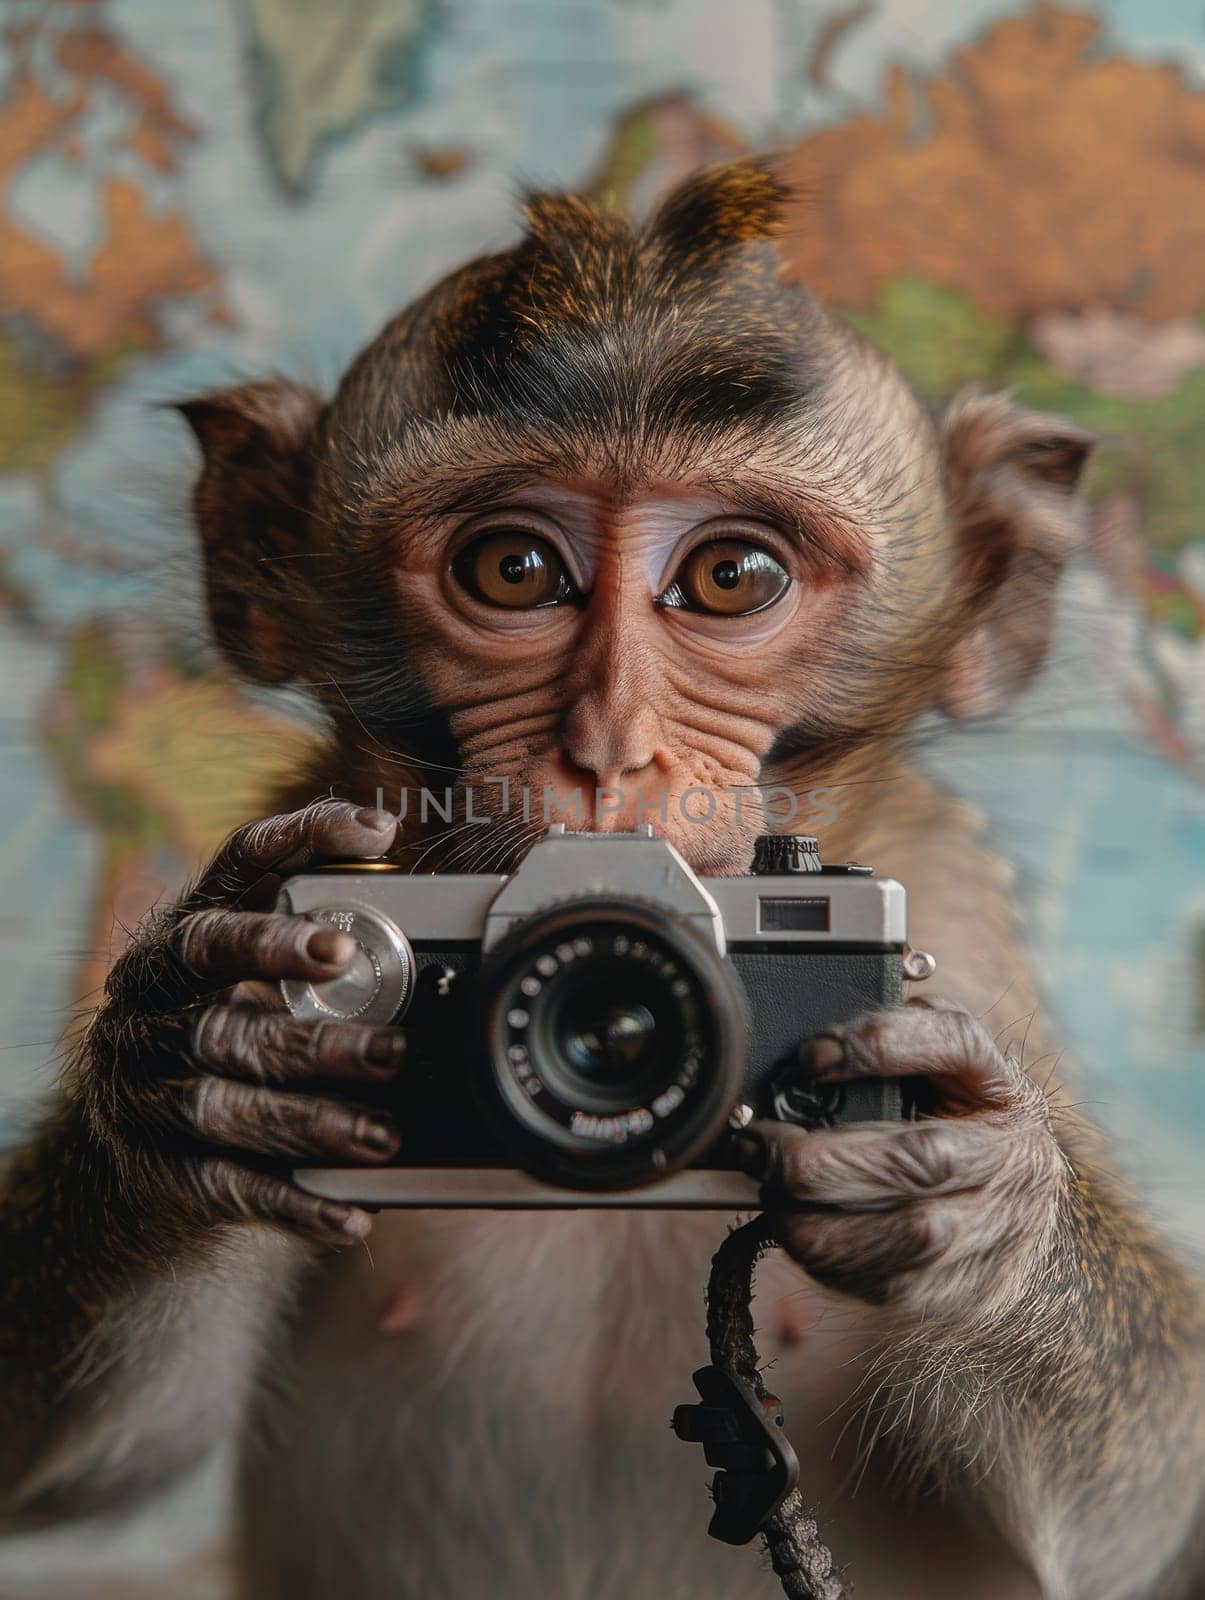 A monkey is holding a camera and looking at the camera. The monkey is wearing a camera strap and he is taking a picture